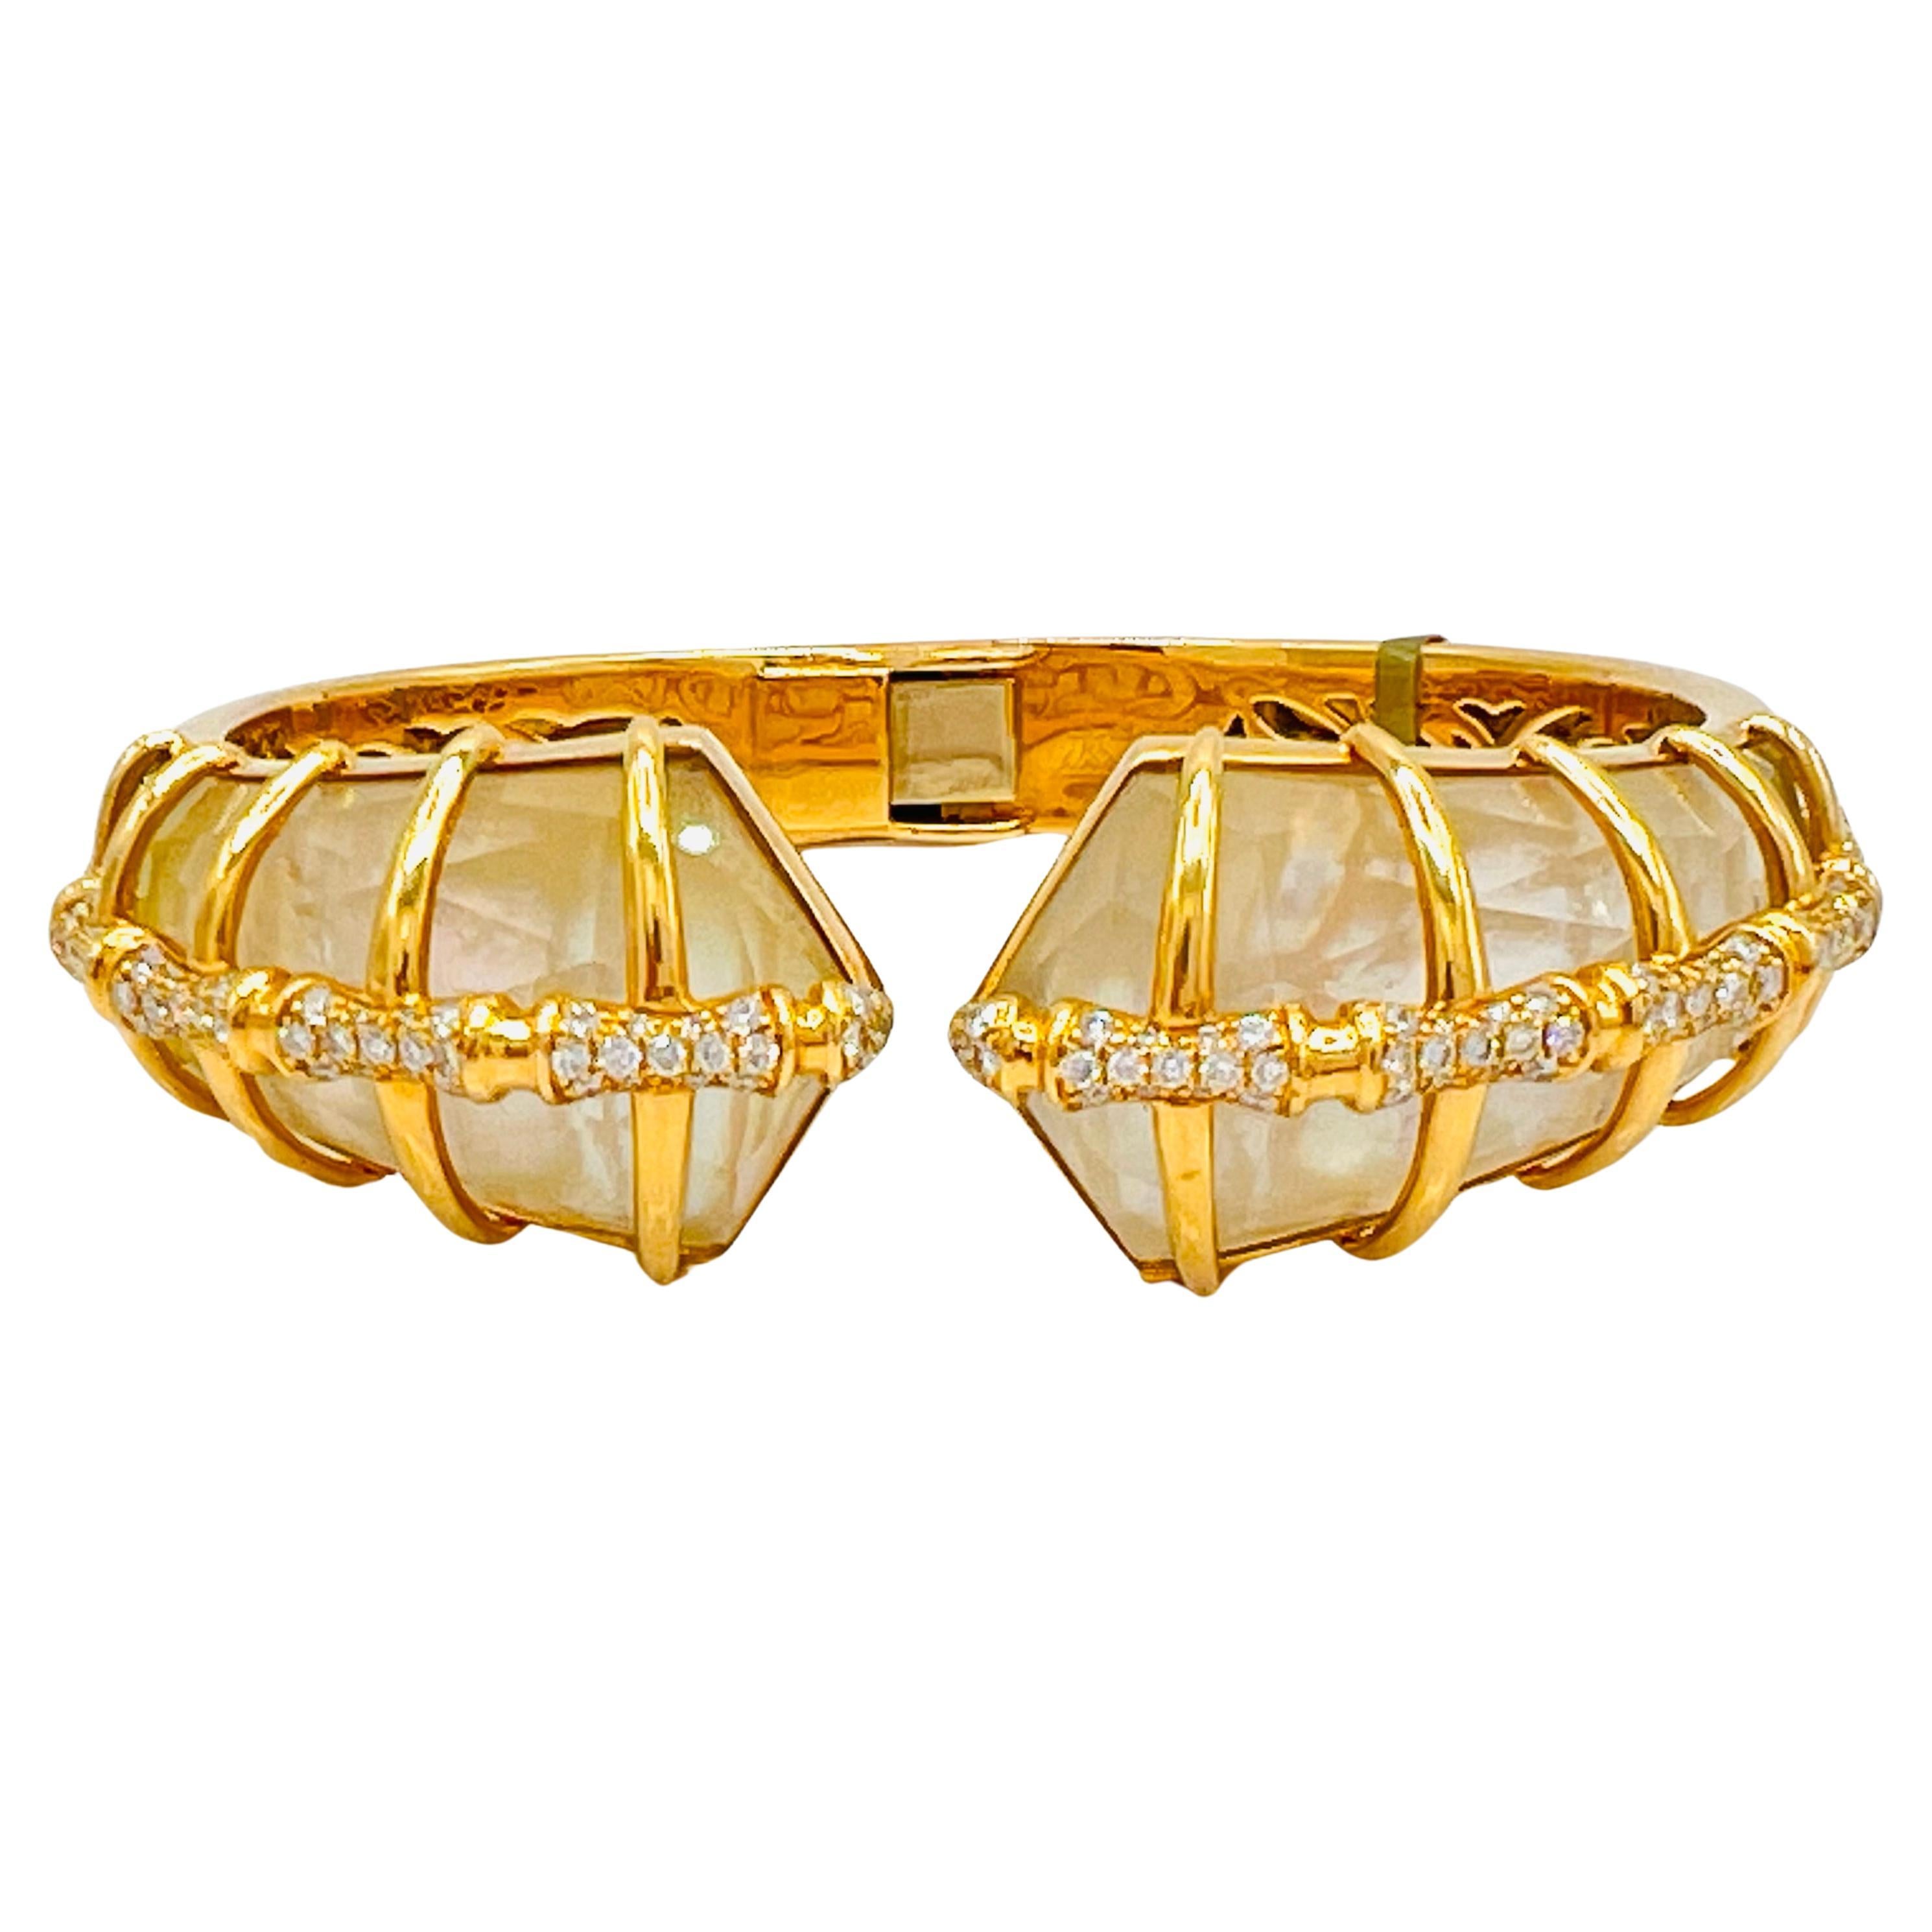 Estate Stephen Webster White Diamond and Crystal Bangle in 18K Yellow Gold